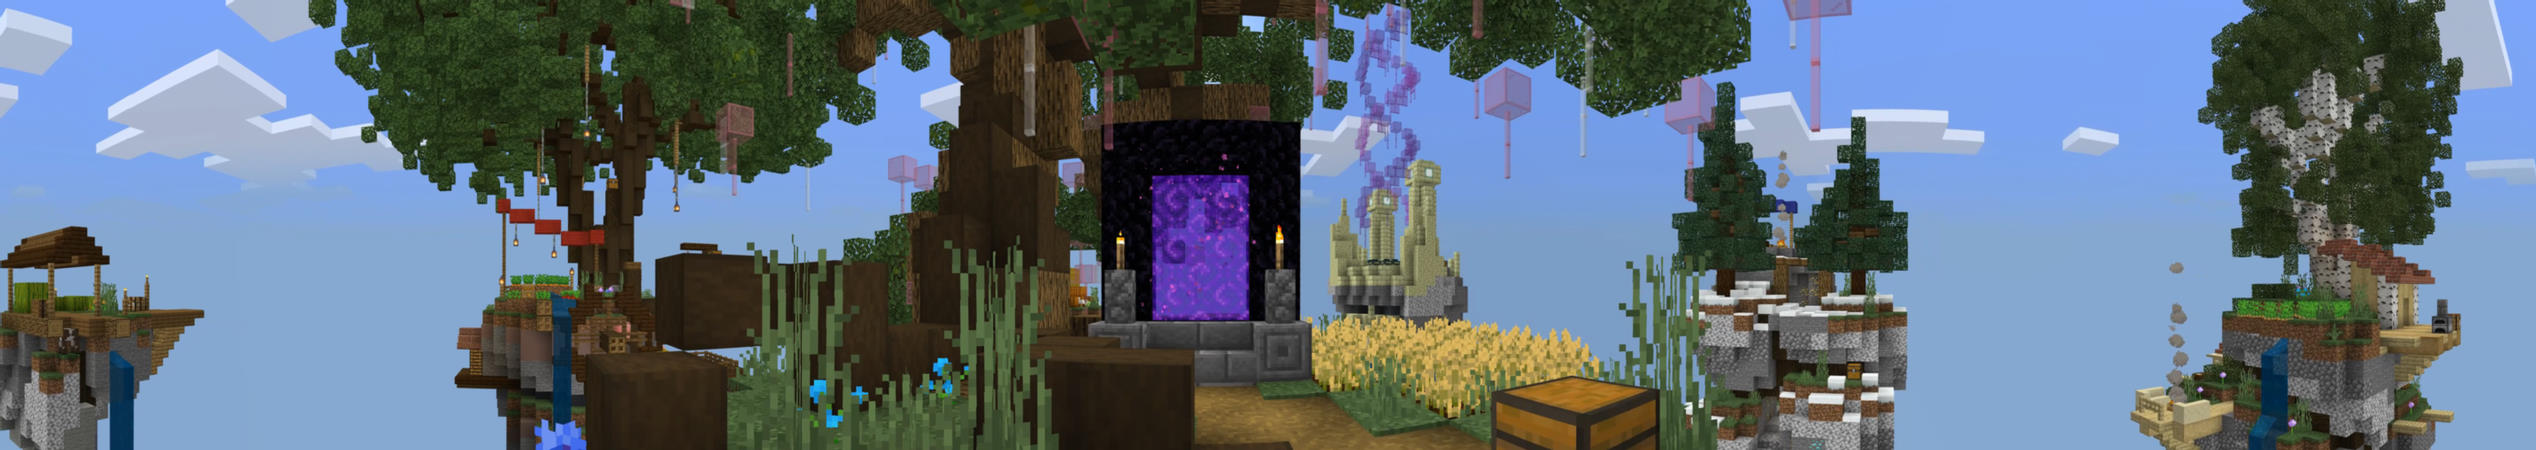 Skyblock Nether Dungeons Panorama